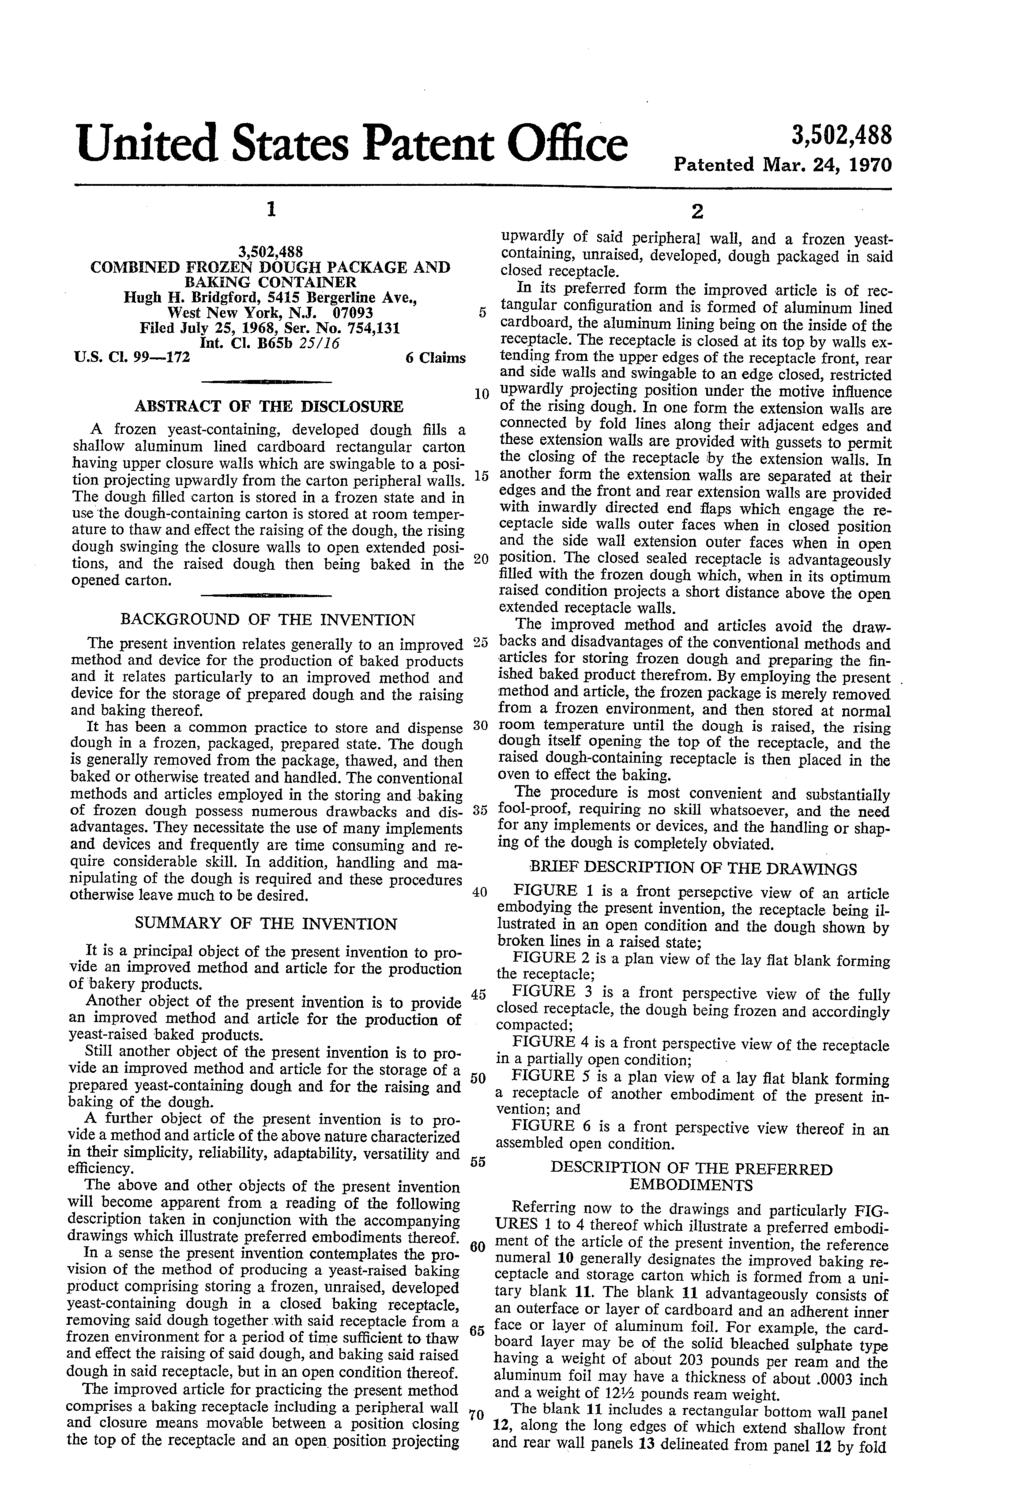 United States Patent Office COMBINED FROZEN DOUGH PACKAGE AND BAKENG CONTANER Hugh H. Bridgford, 5415 Bergerline Ave., West New York, N.J. 07093 Filed July 25, 1968, Ser. No. 754,131 Int, C. B65b.